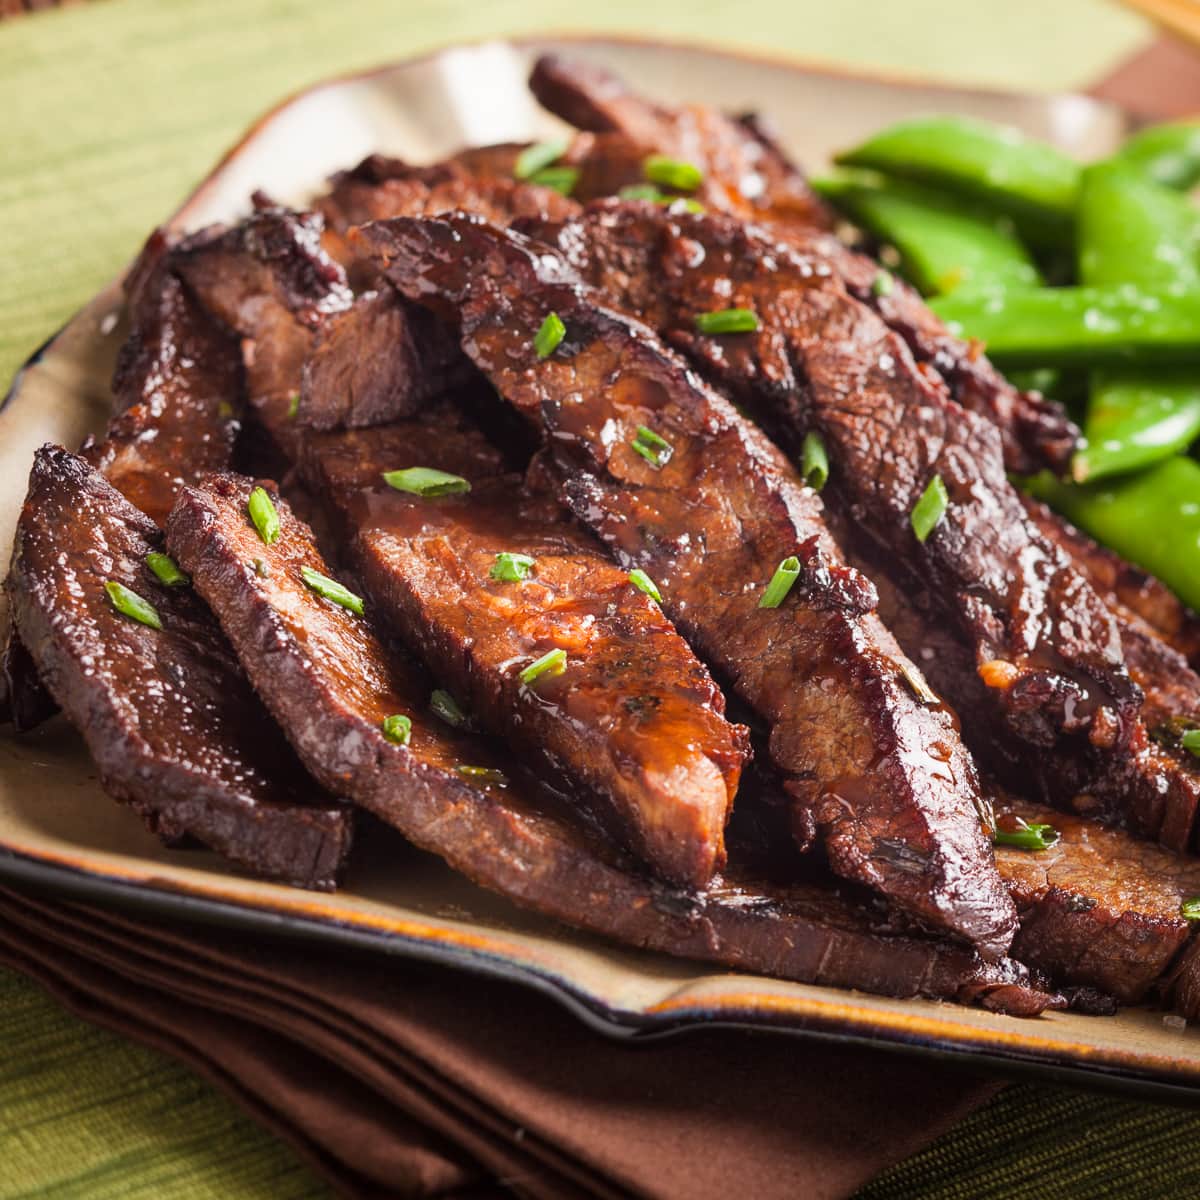 Asian ginger flank steak piled on a plate.